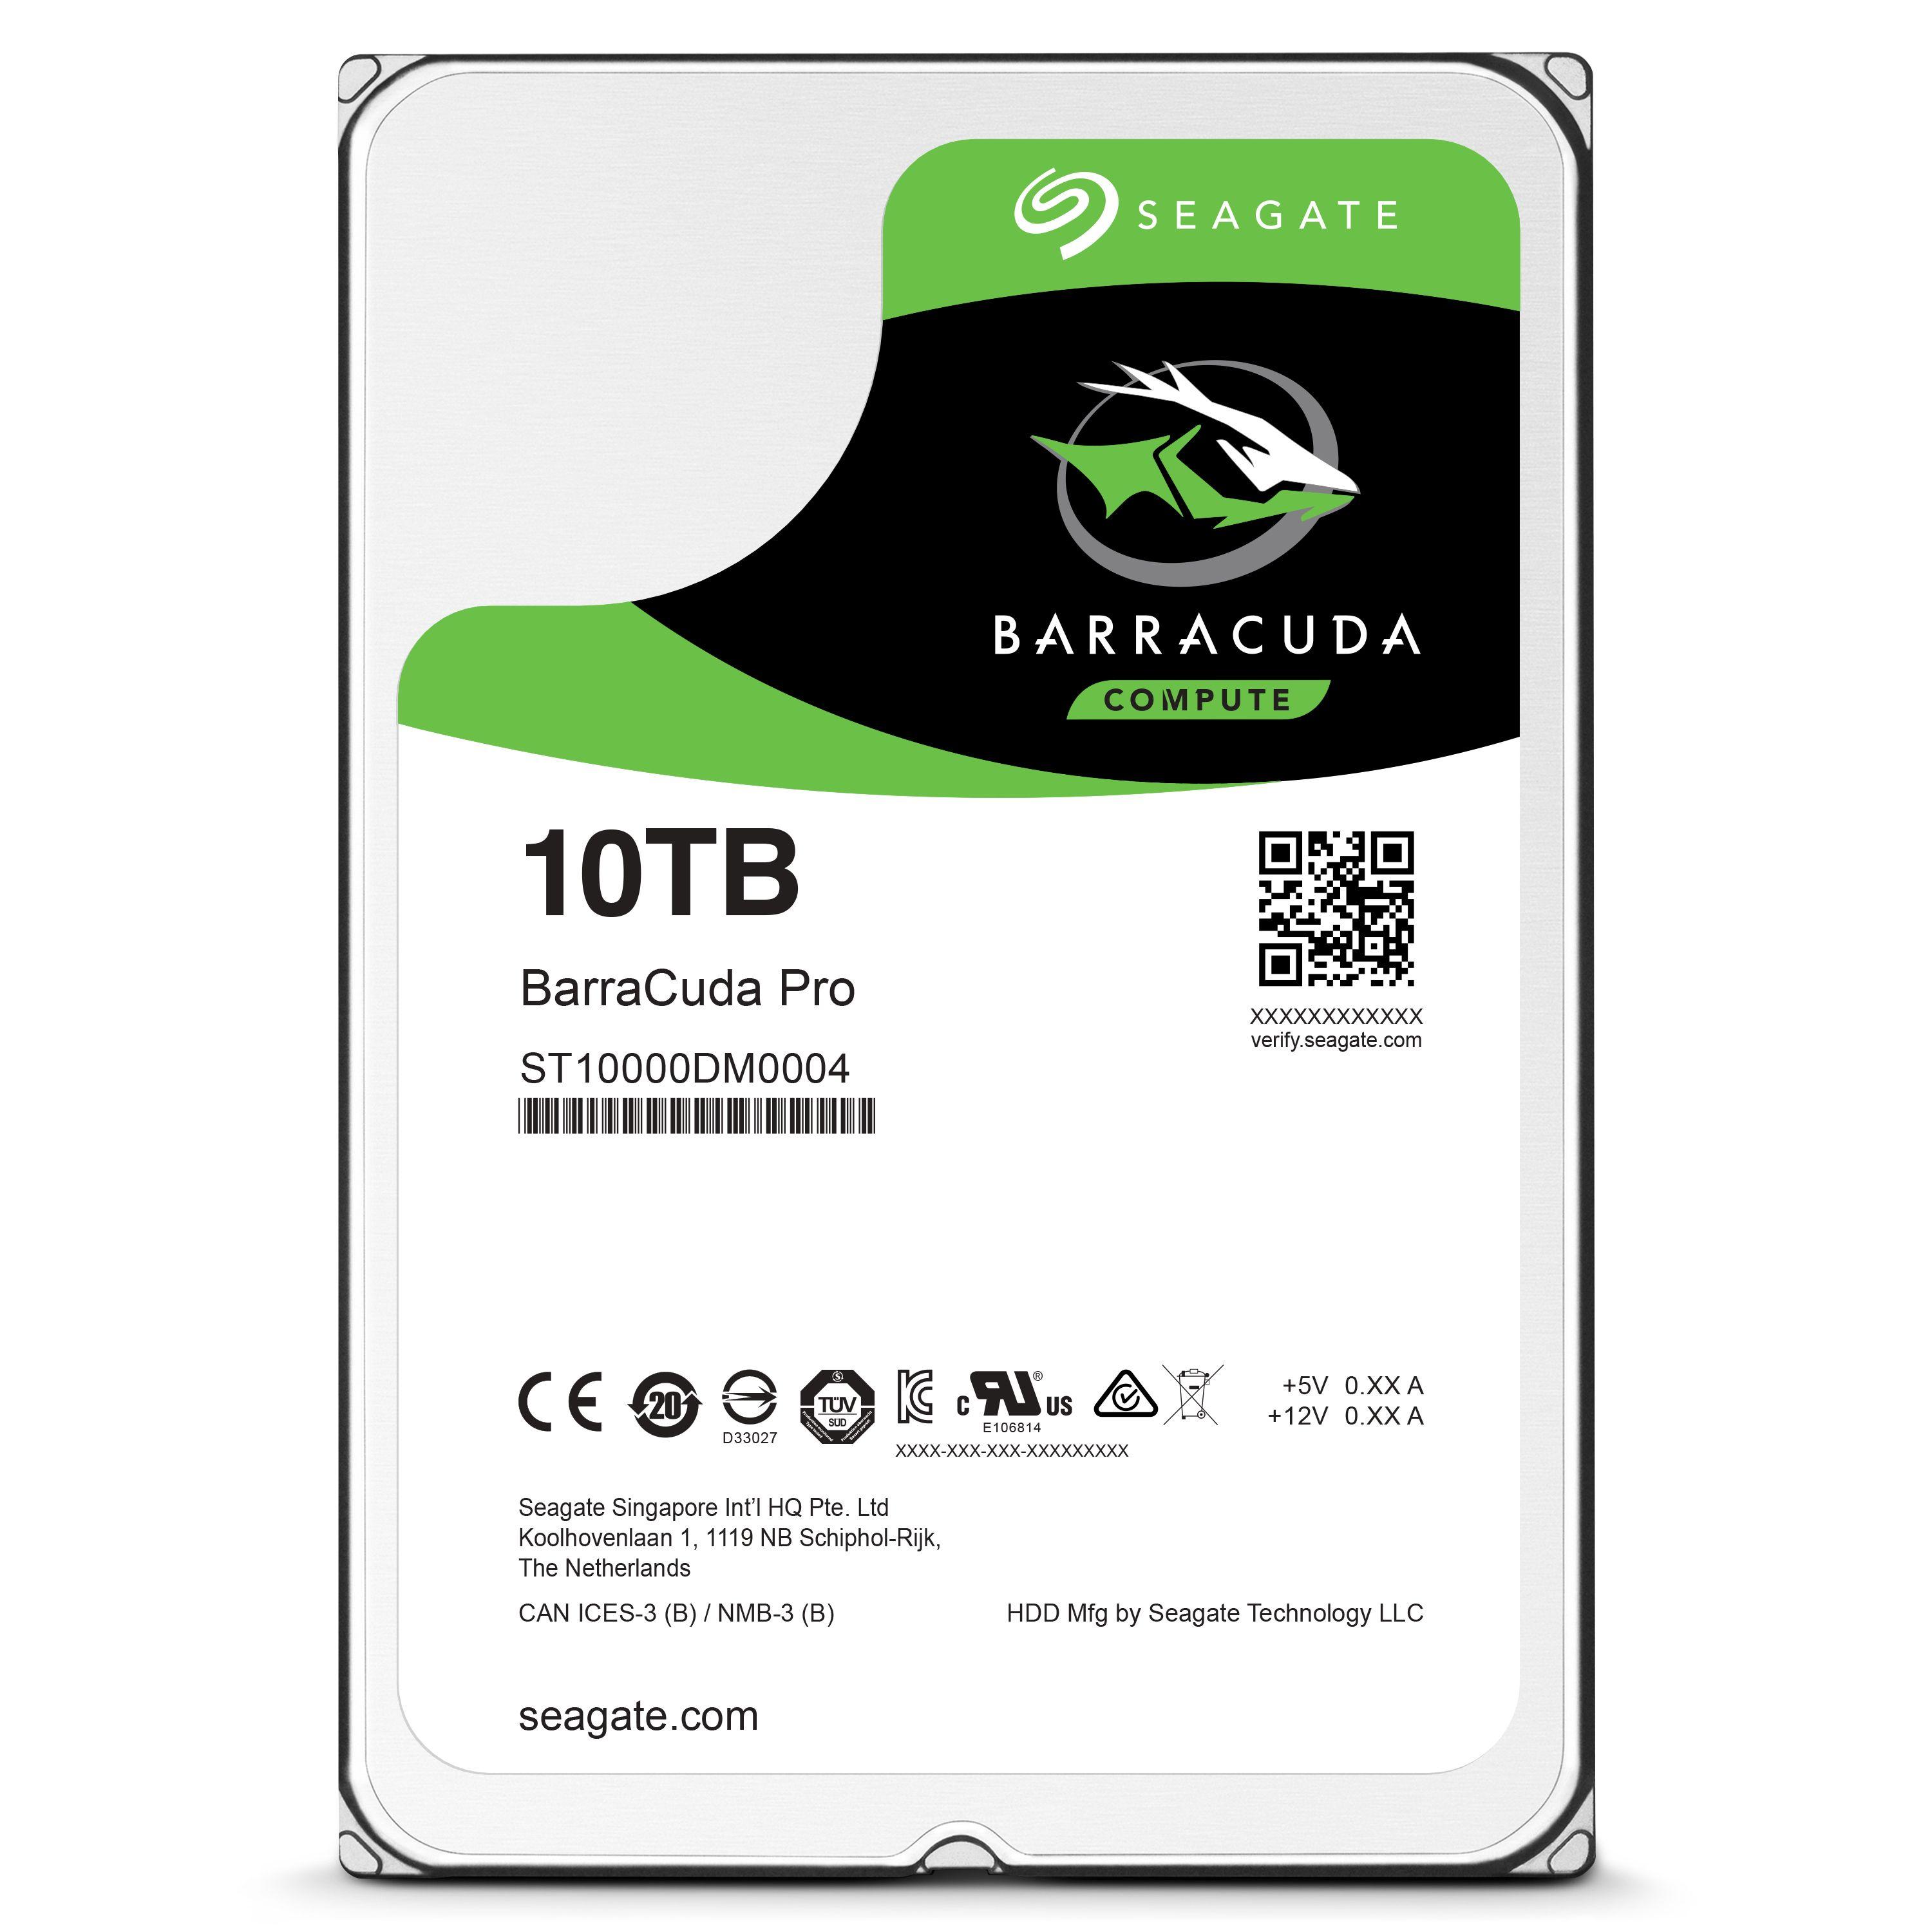 HDD Seagate Logo - Seagate unveils hard drives with up to 10TB capacity | Computerworld